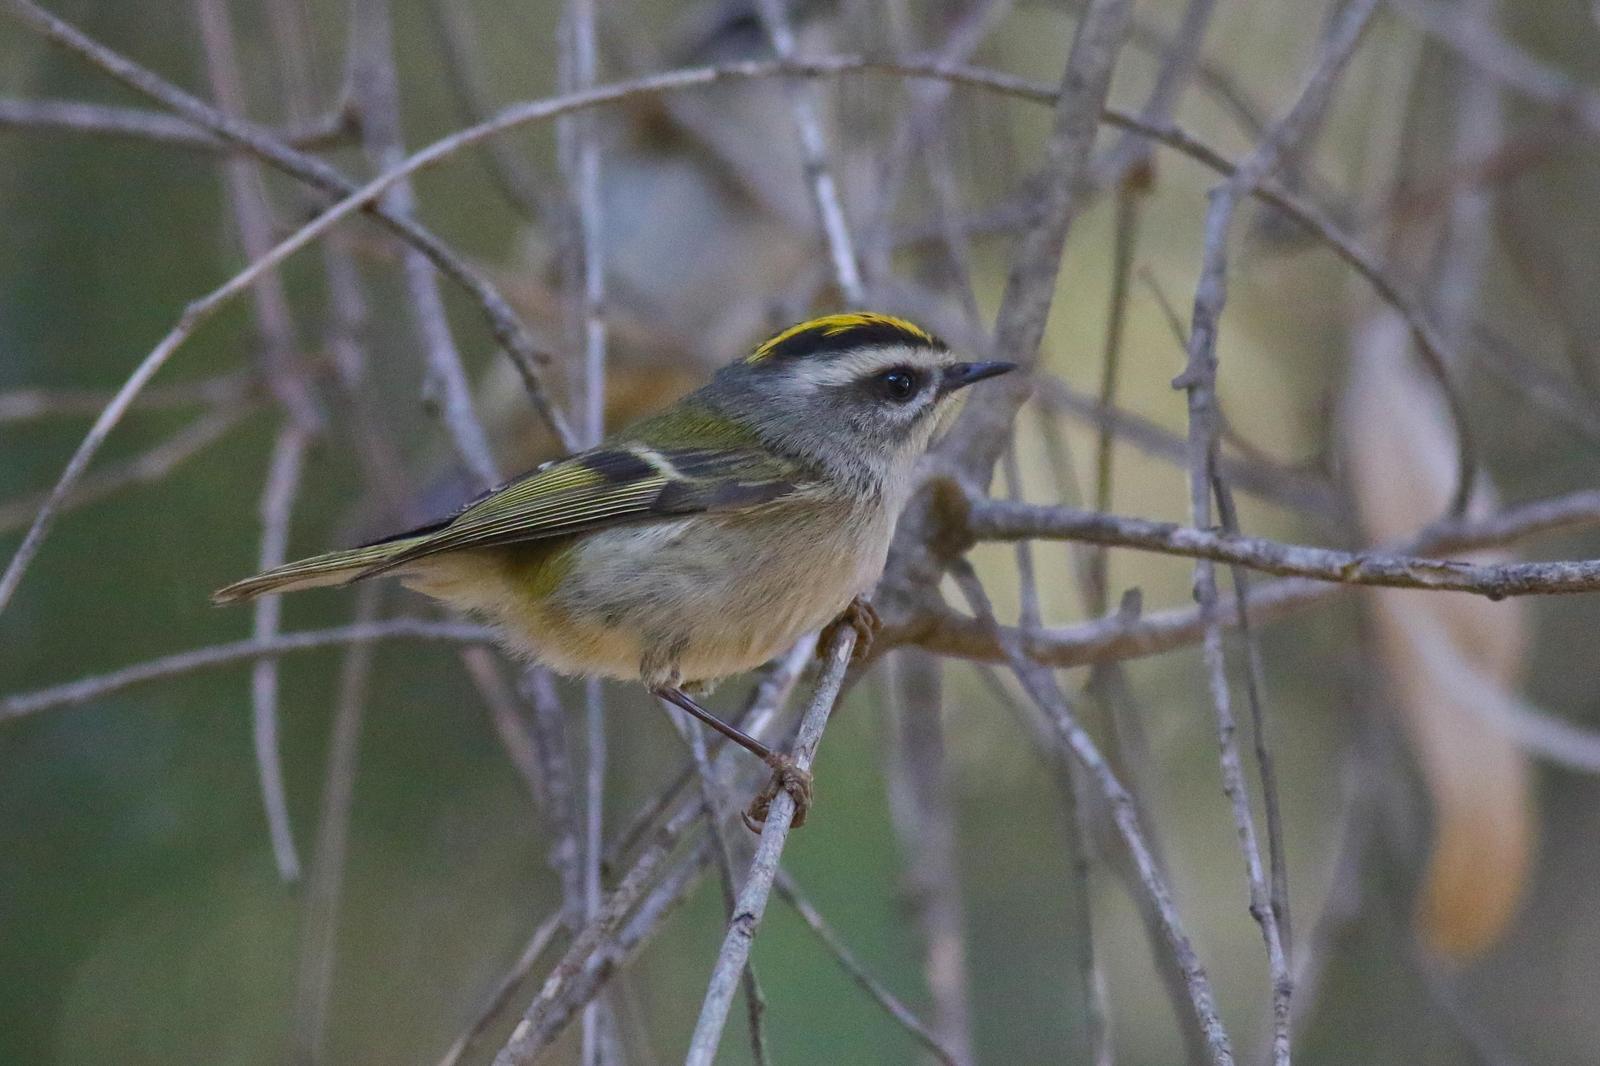 Golden-crowned Kinglet Photo by Tom Ford-Hutchinson